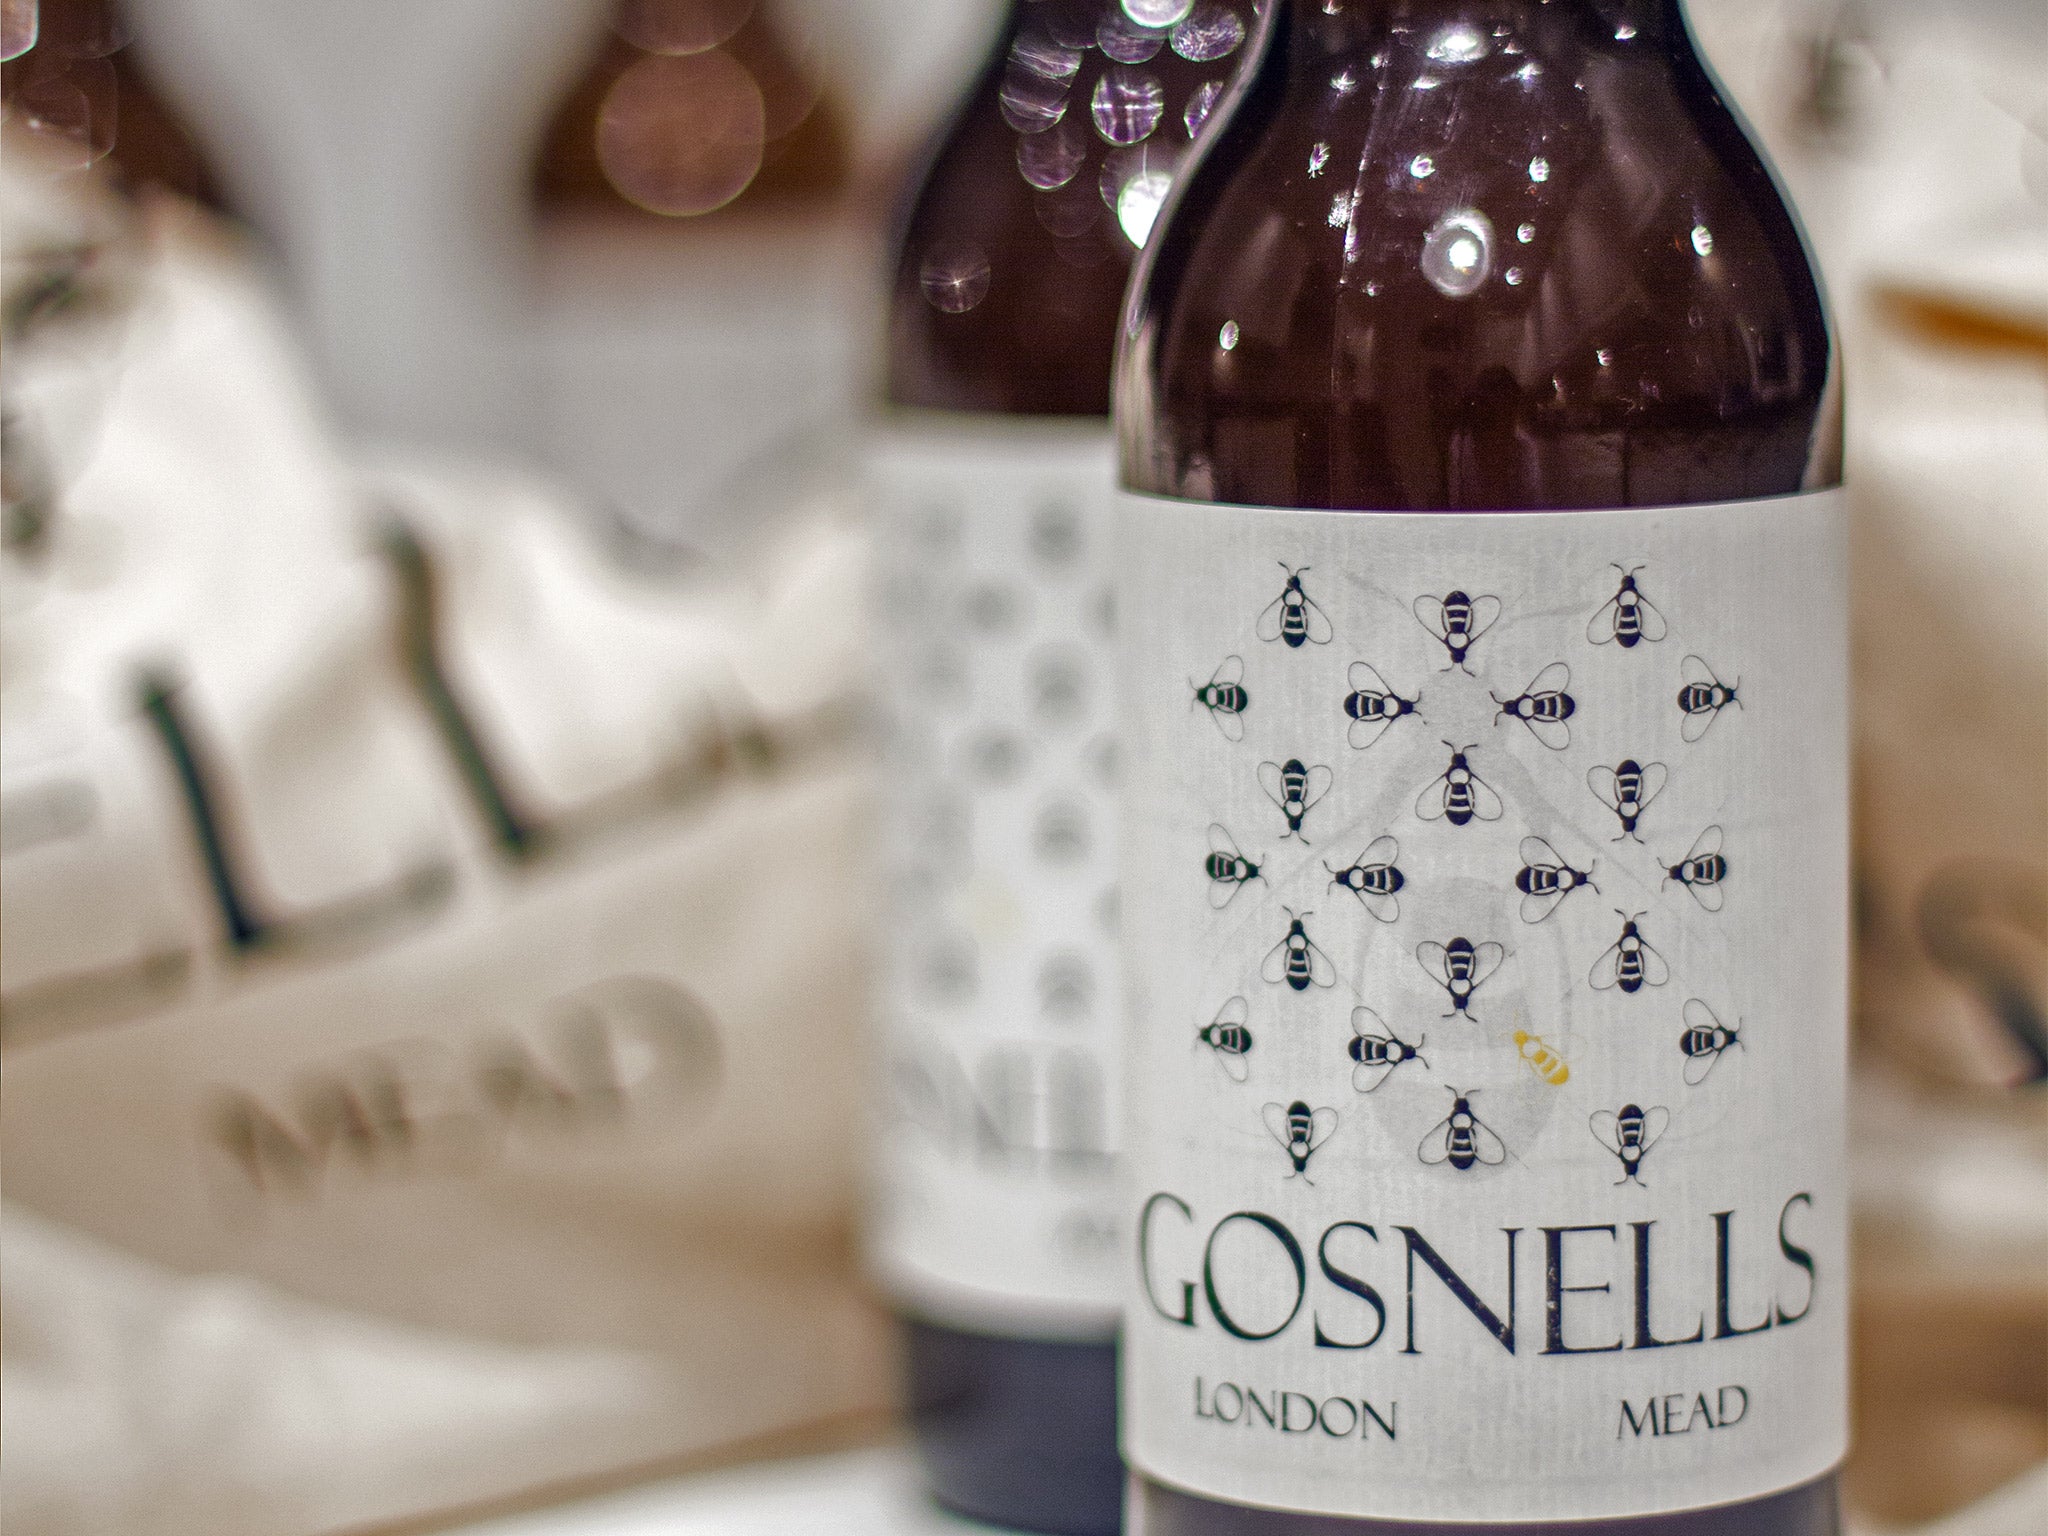 Another round: London’s Tom Gosnell was the first producer to try refreshing mead’s popularity in the UK